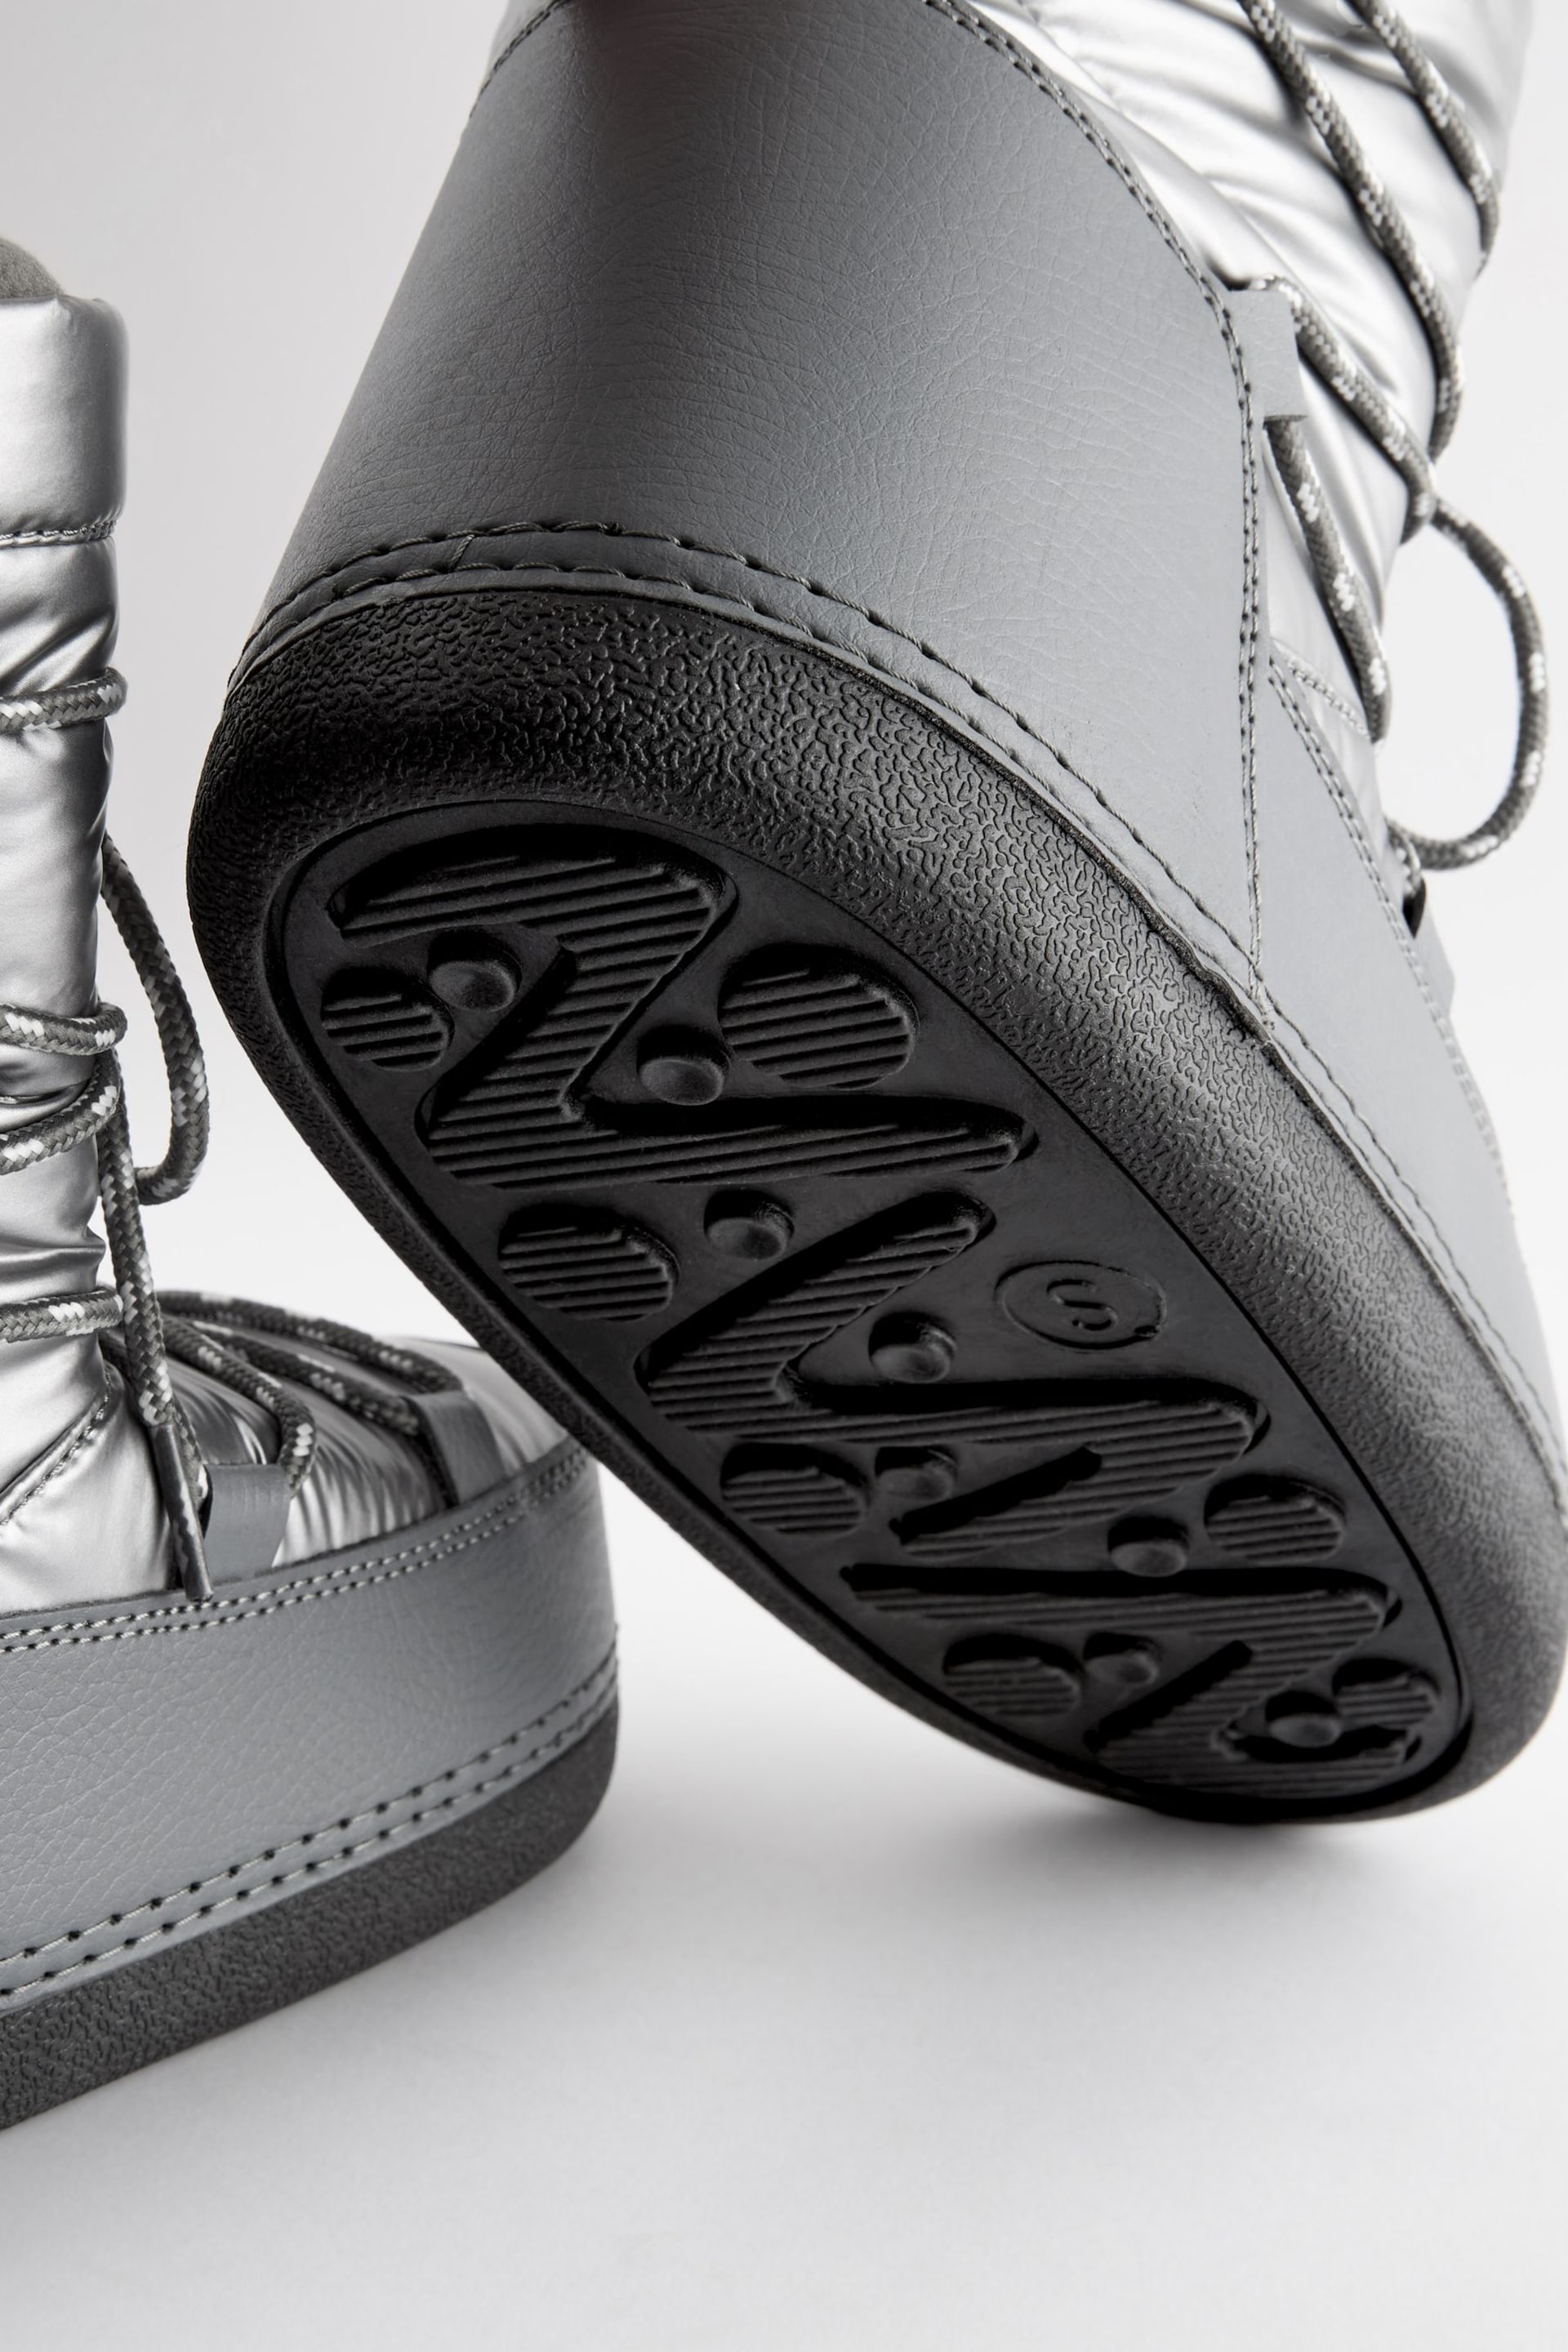 Silver Fashion Padded Boots - Image 9 of 10